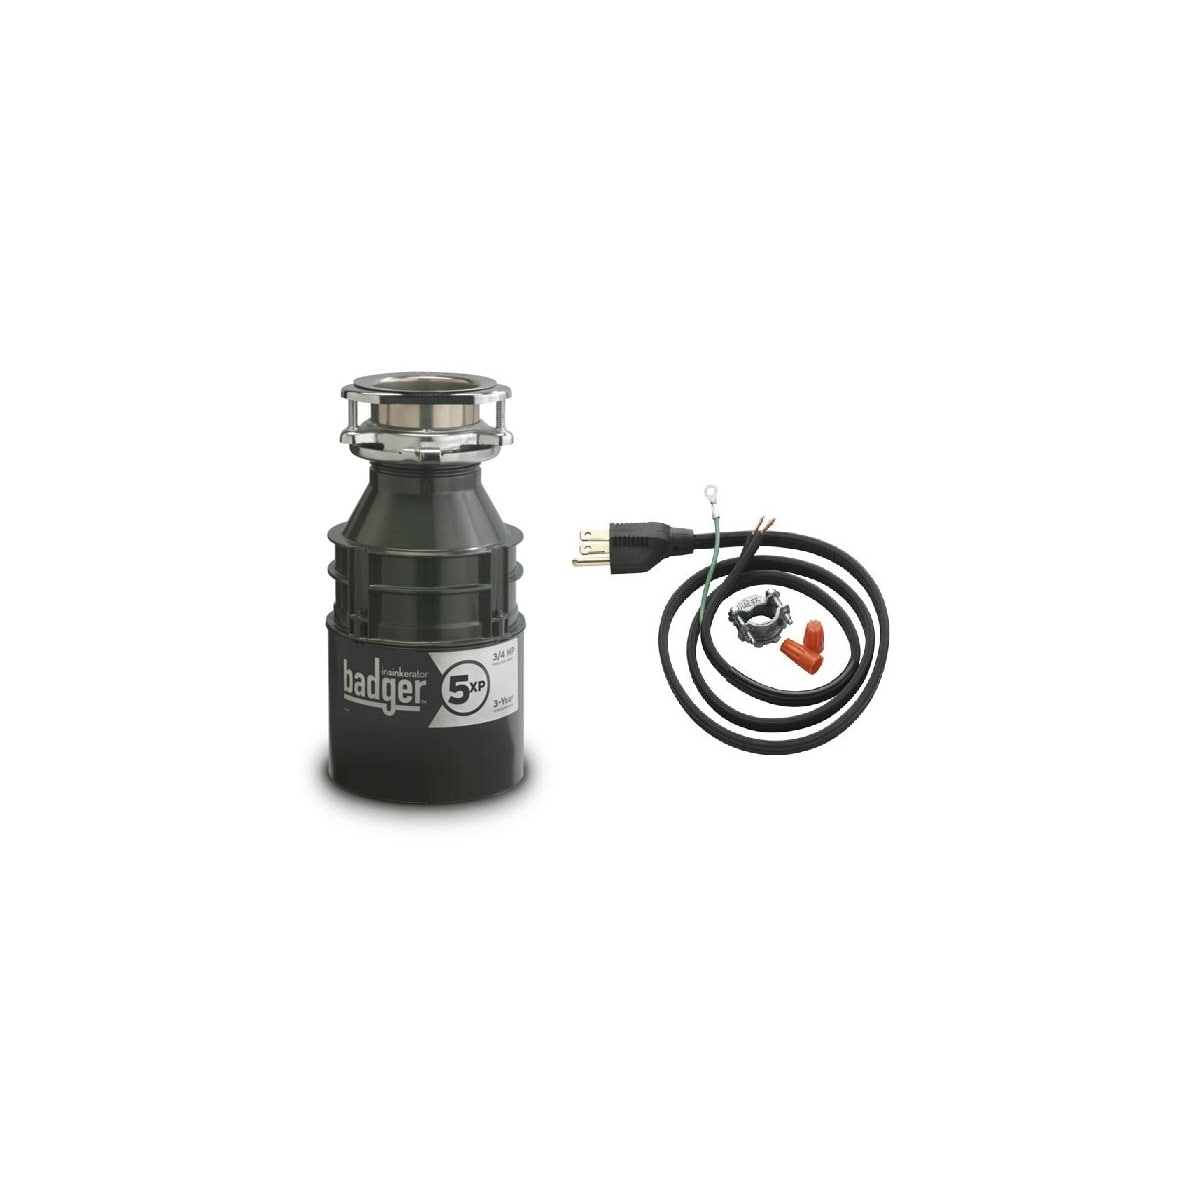 Insinkerator Badger 1 W//Power Cord 1//3 HP Continuous Feed Garbage Disposal New